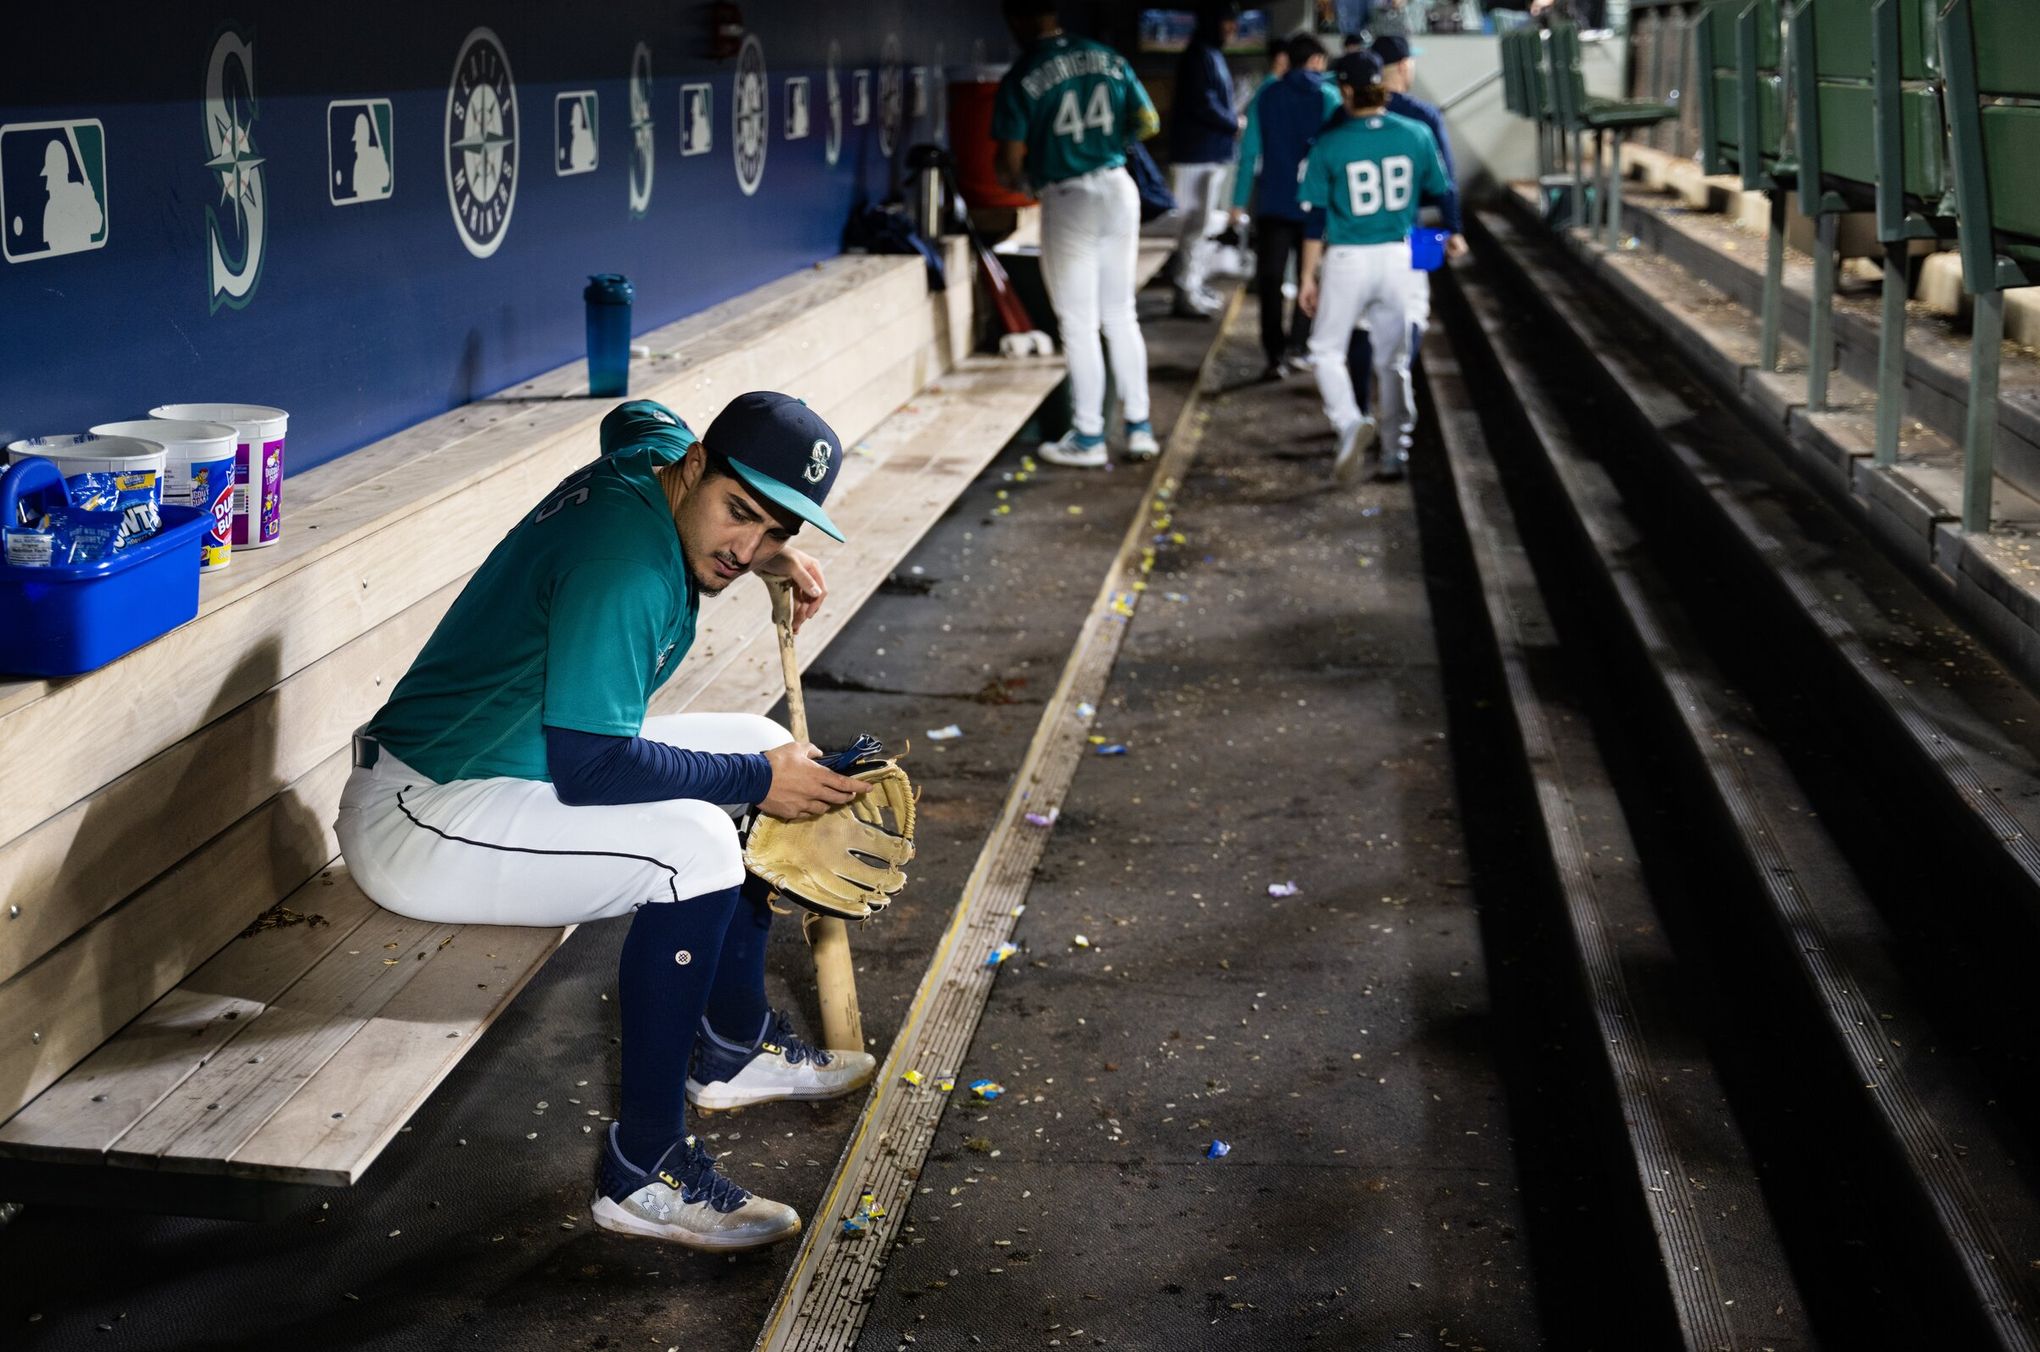 Mariners sit in playoff spot with two weeks left in season, Sept. 30 game  vs. Texas on FOX